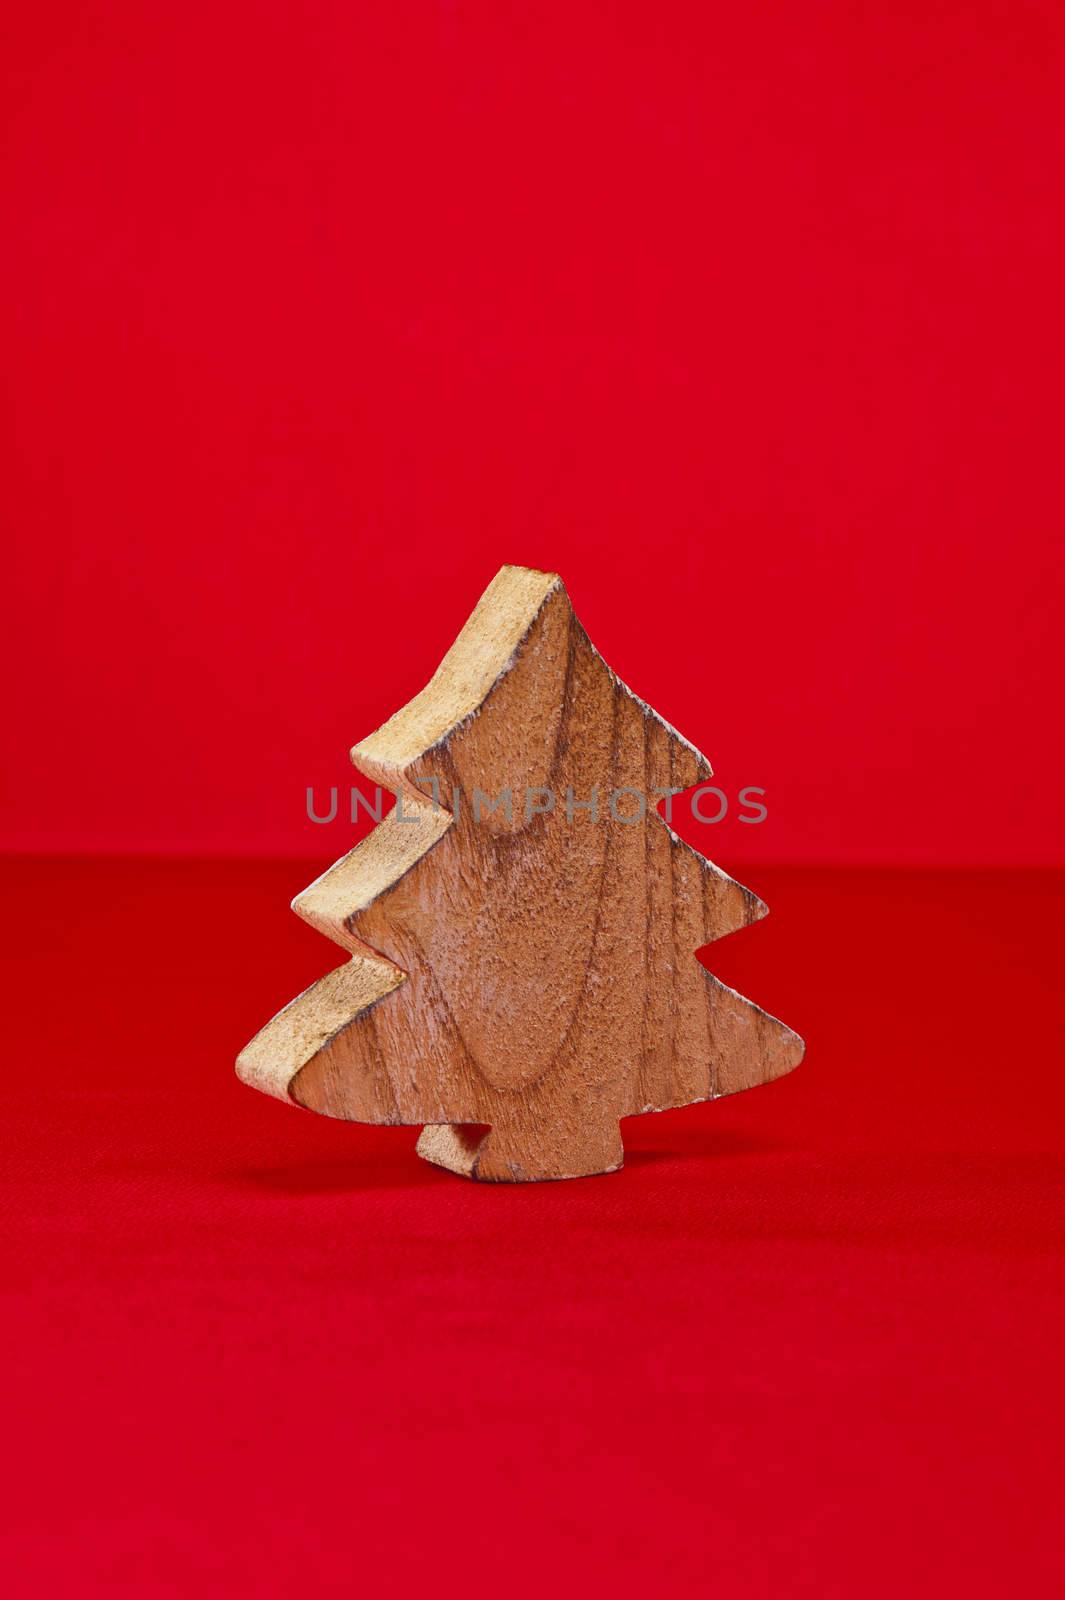 Wood cut shape Christmas tree over red surface